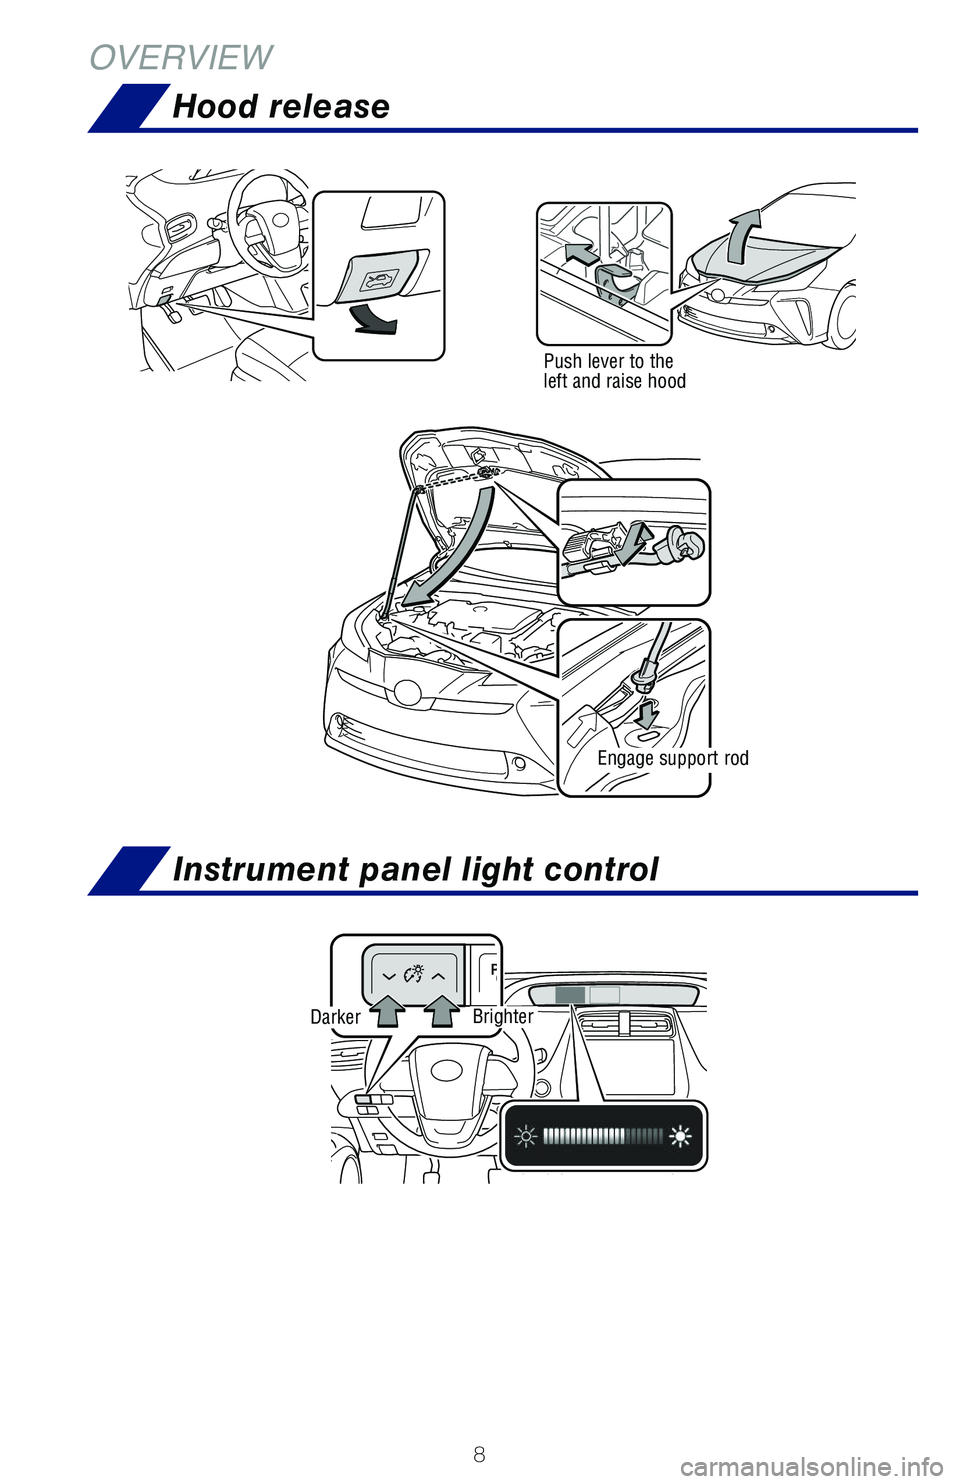 TOYOTA PRIUS 2021  Owners Manual (in English) 8
Instrument panel light control
Hood release
OVERVIEW
Push lever to the left and raise hood
Engage support rod
DarkerBrighter
126899_MY21_Prius_QRG_V2_ML_0614_R1.indd   8126899_MY21_Prius_QRG_V2_ML_0